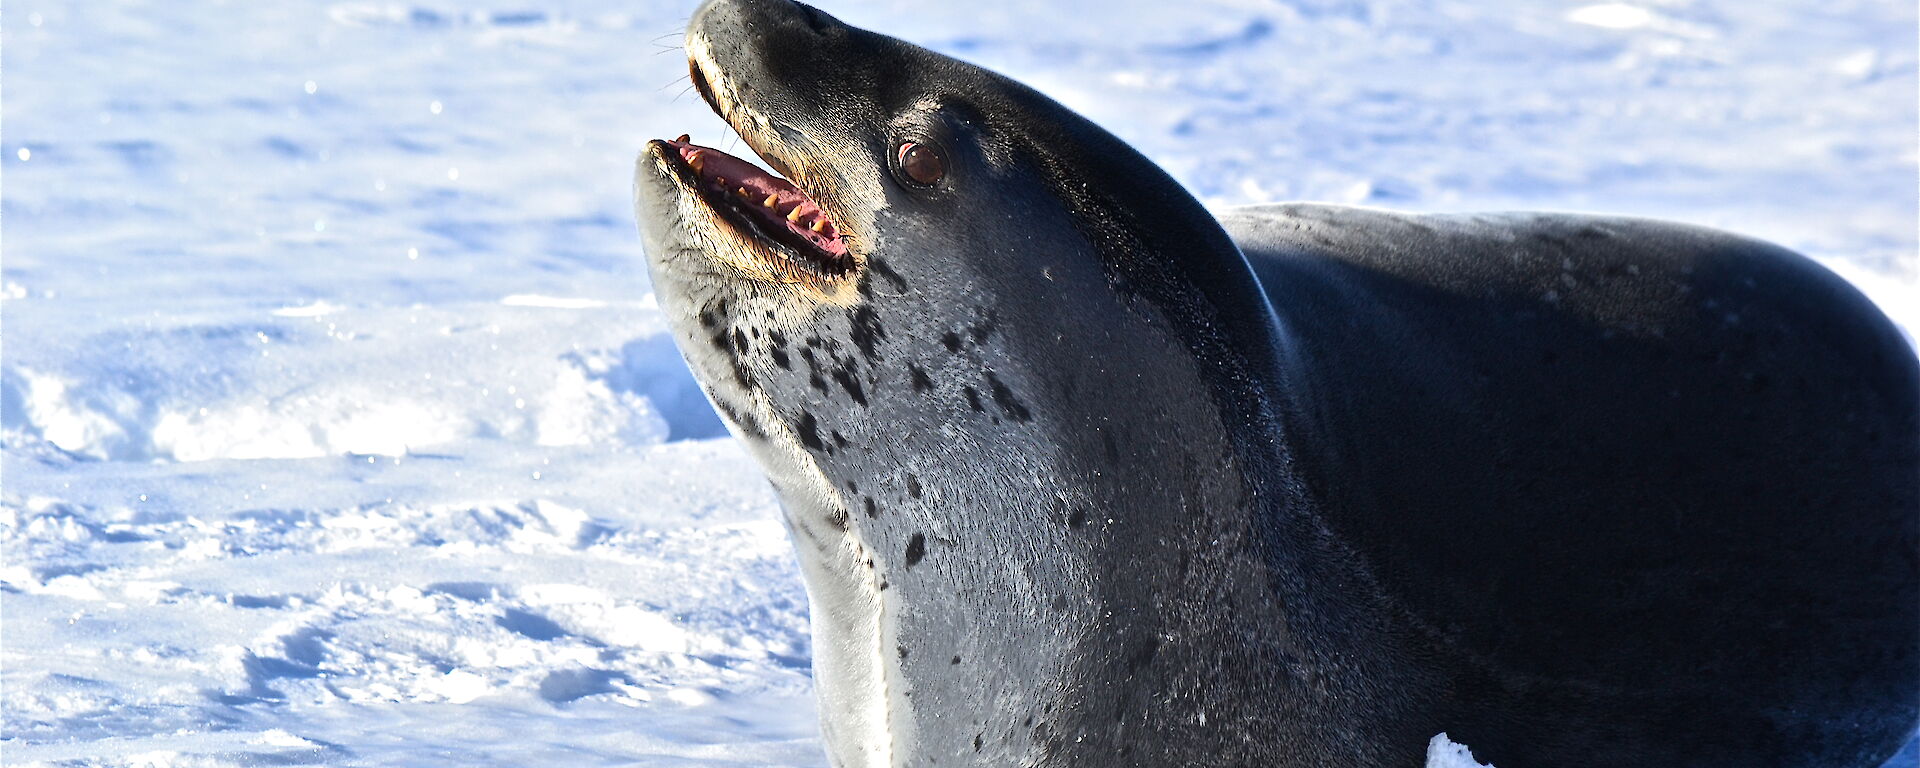 A zoomed close up of a leopard seal smiling